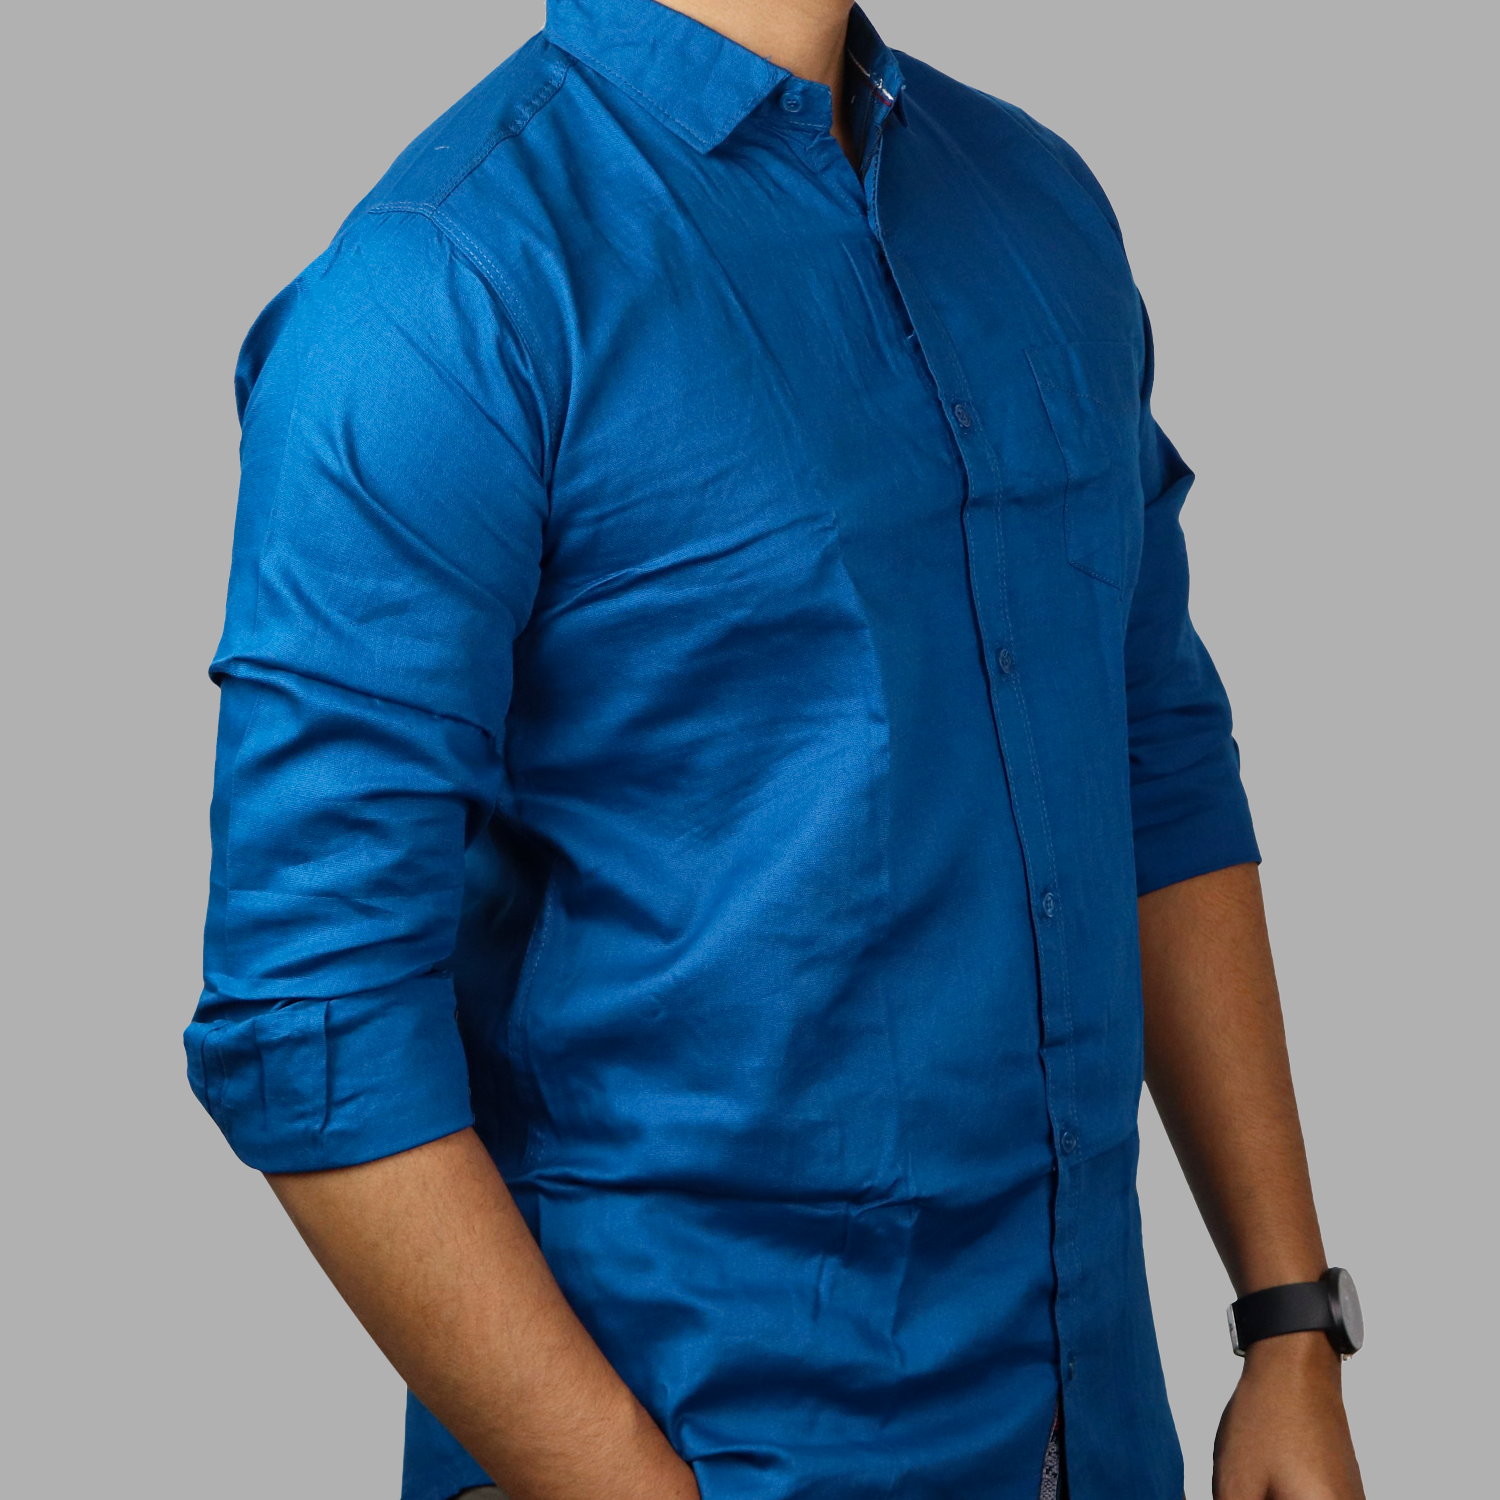 Solid Color Cotton Casual Full Shirt